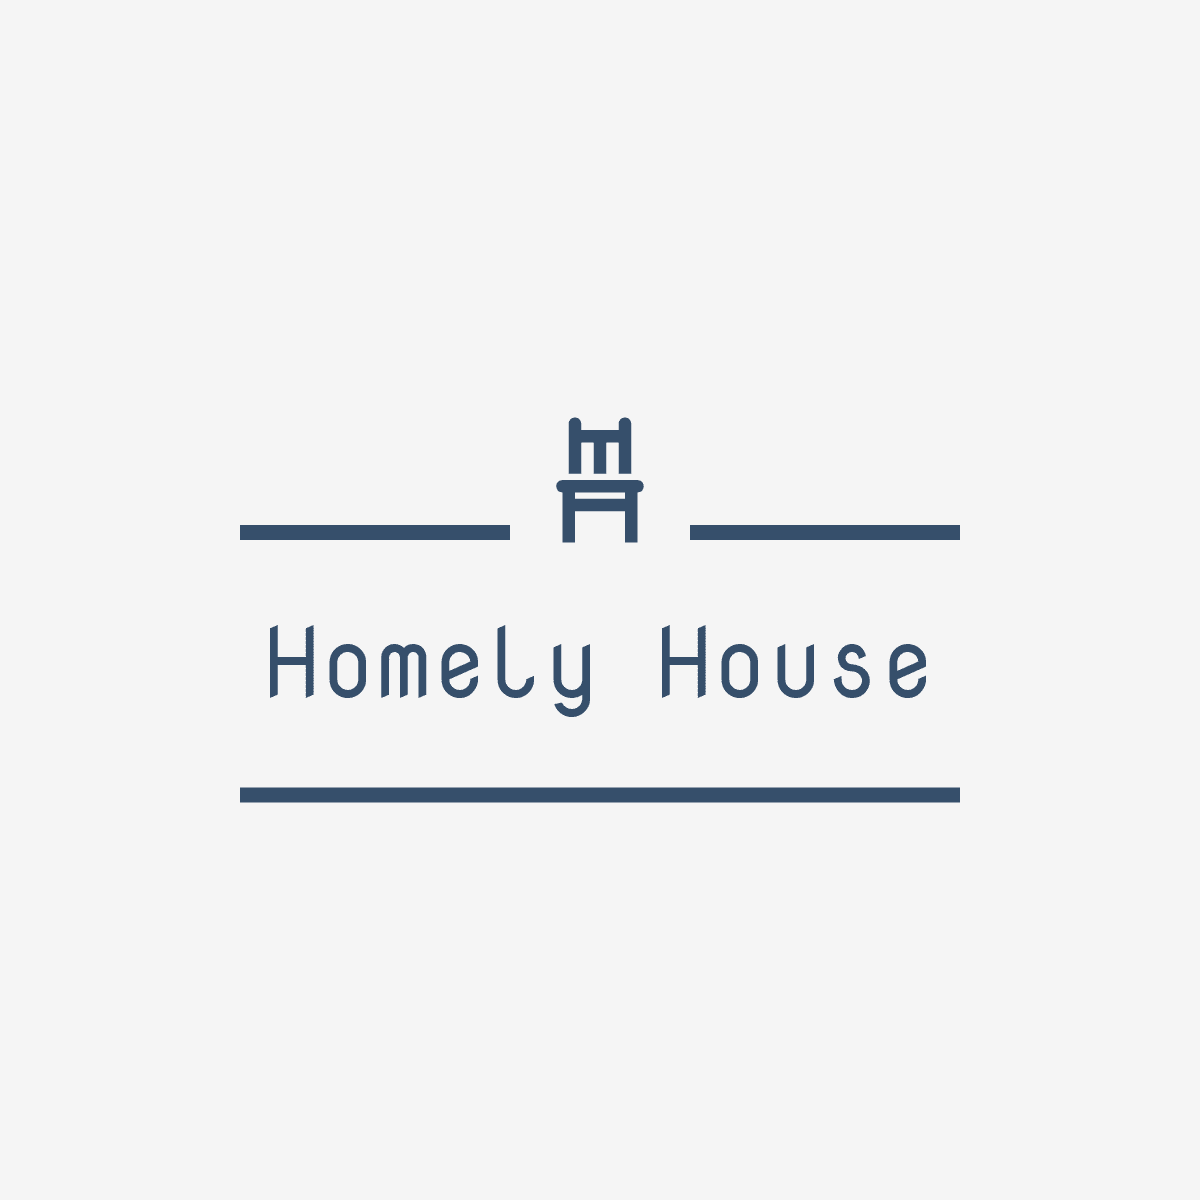 Homely House